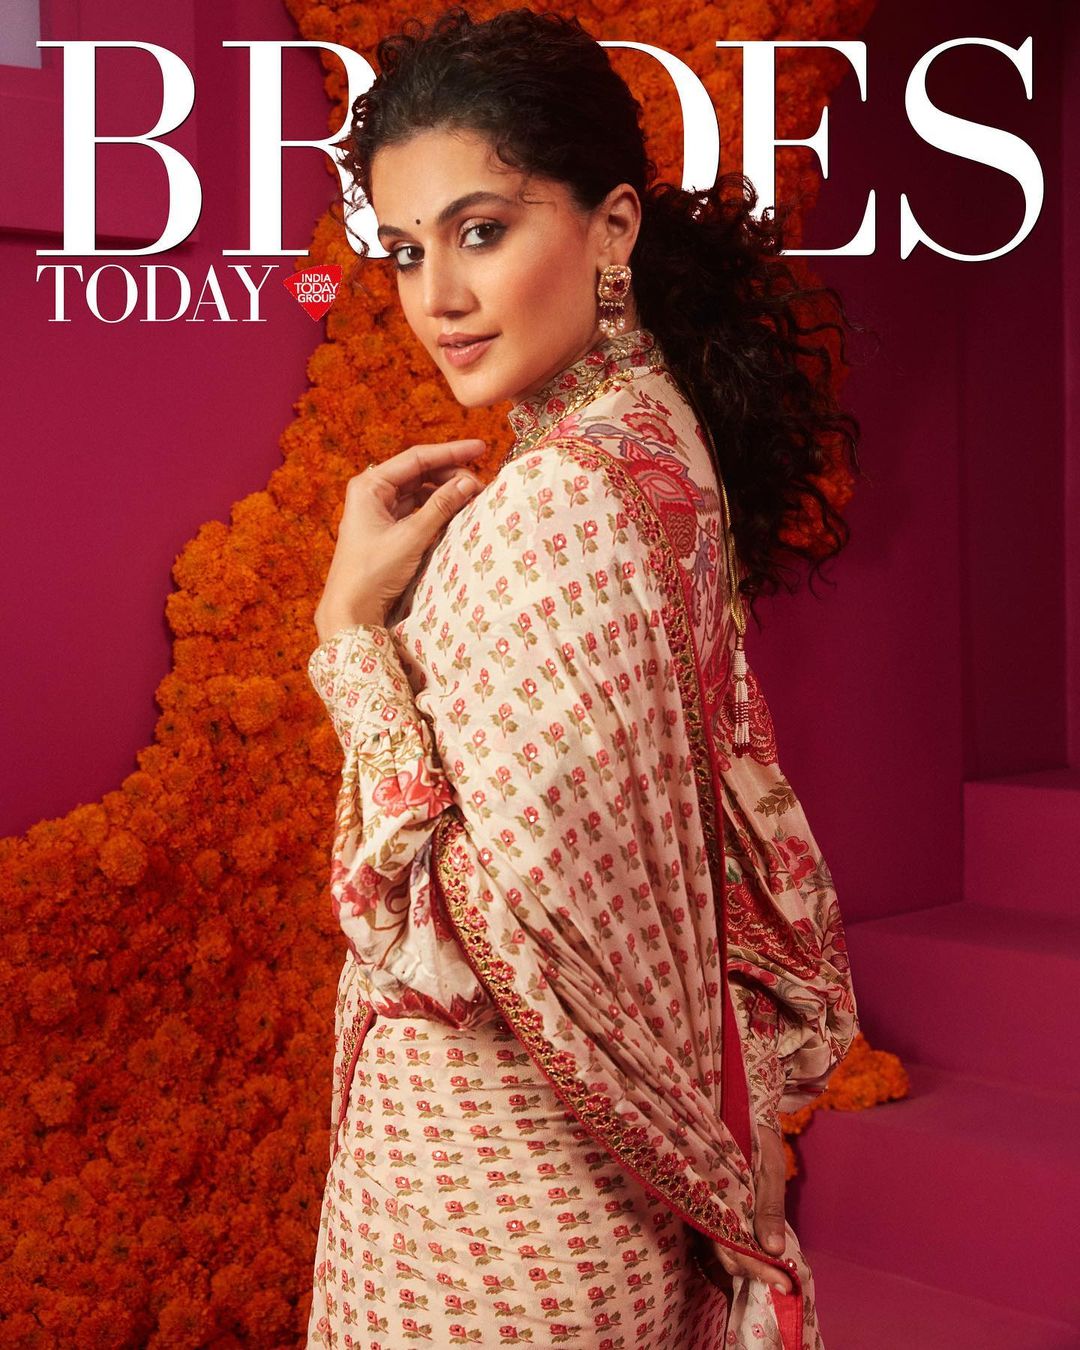 Taapsee Pannu casts a spell in a printed saree